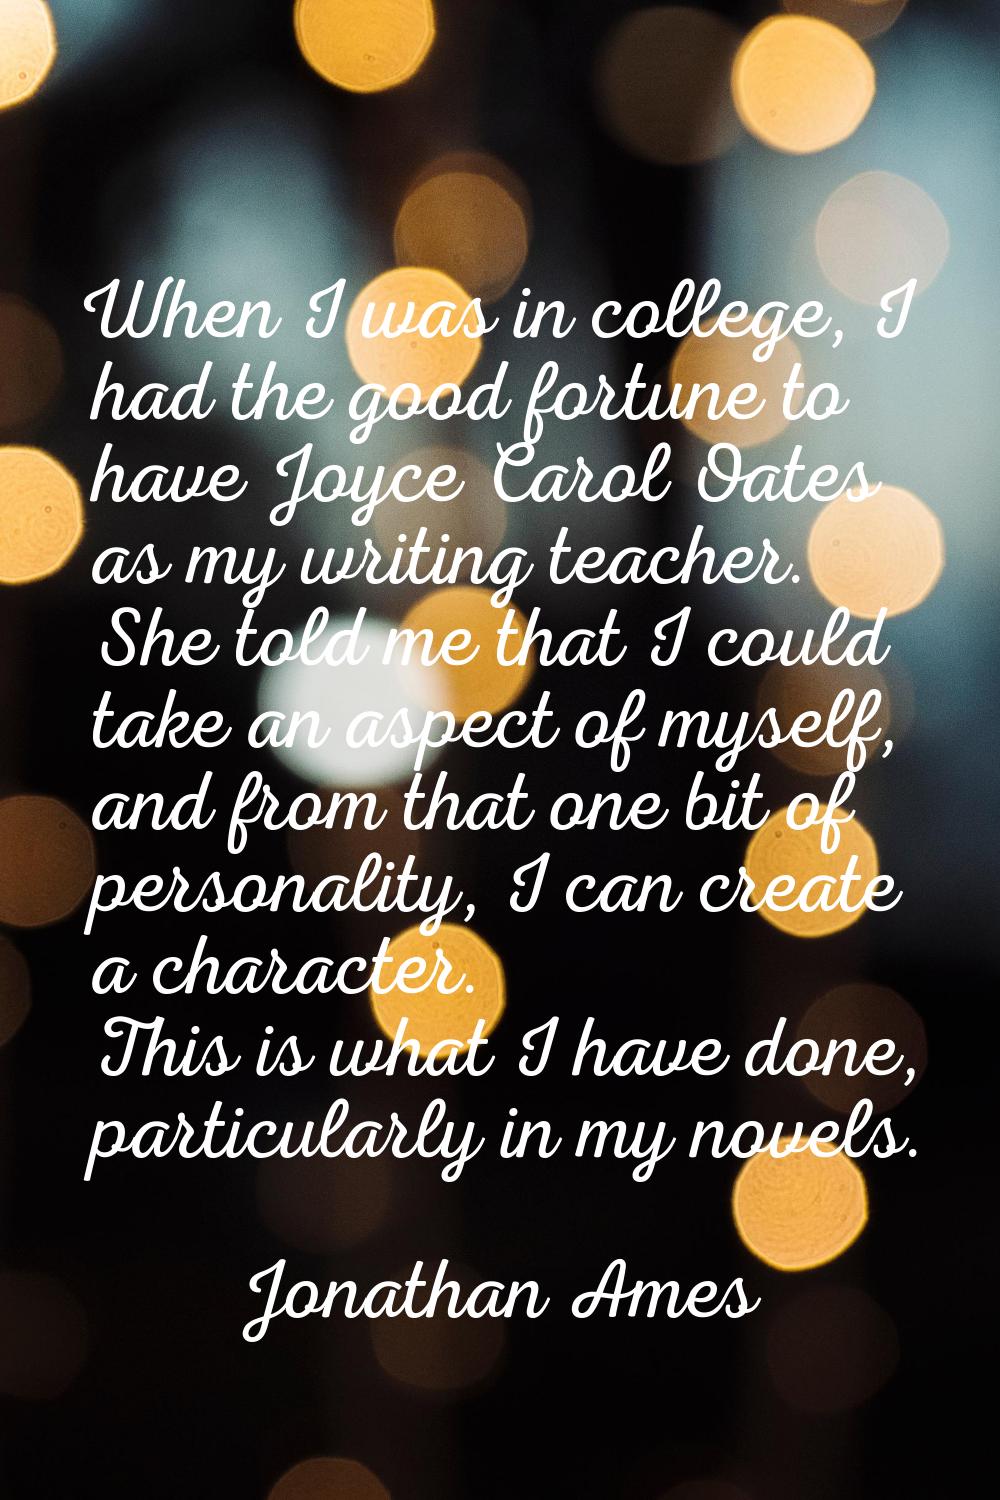 When I was in college, I had the good fortune to have Joyce Carol Oates as my writing teacher. She 